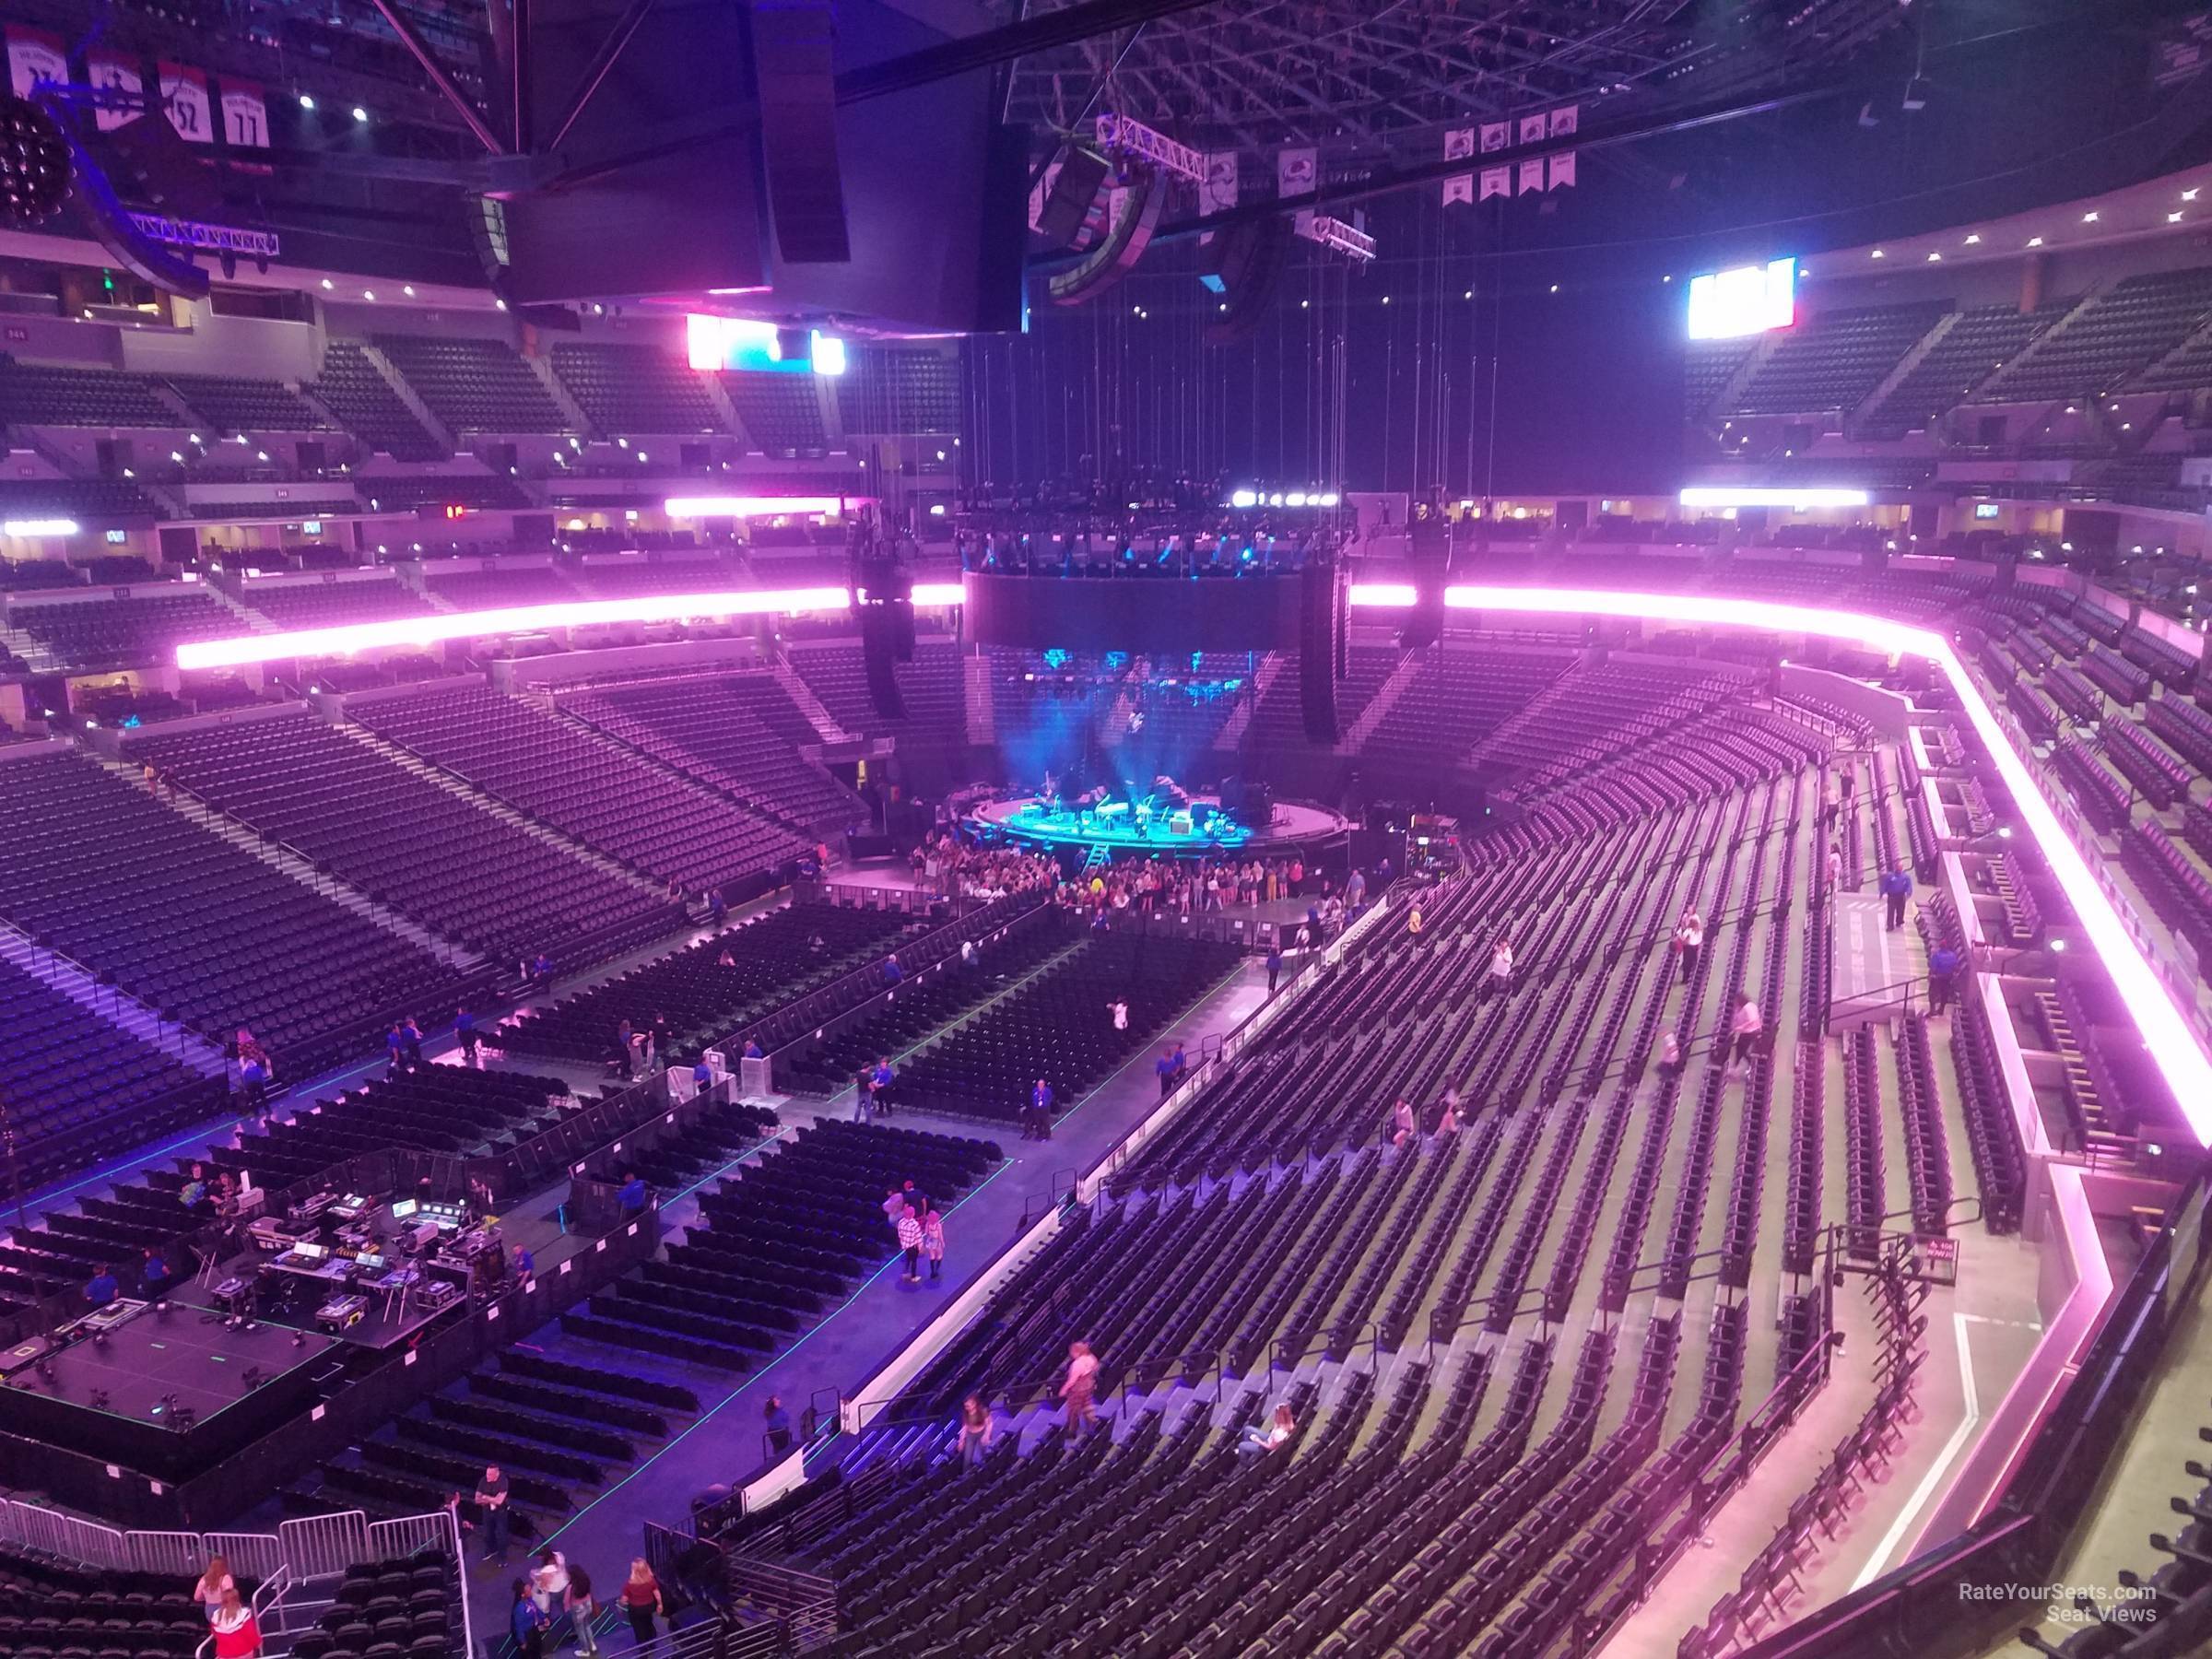 section 313, row 3 seat view  for concert - ball arena